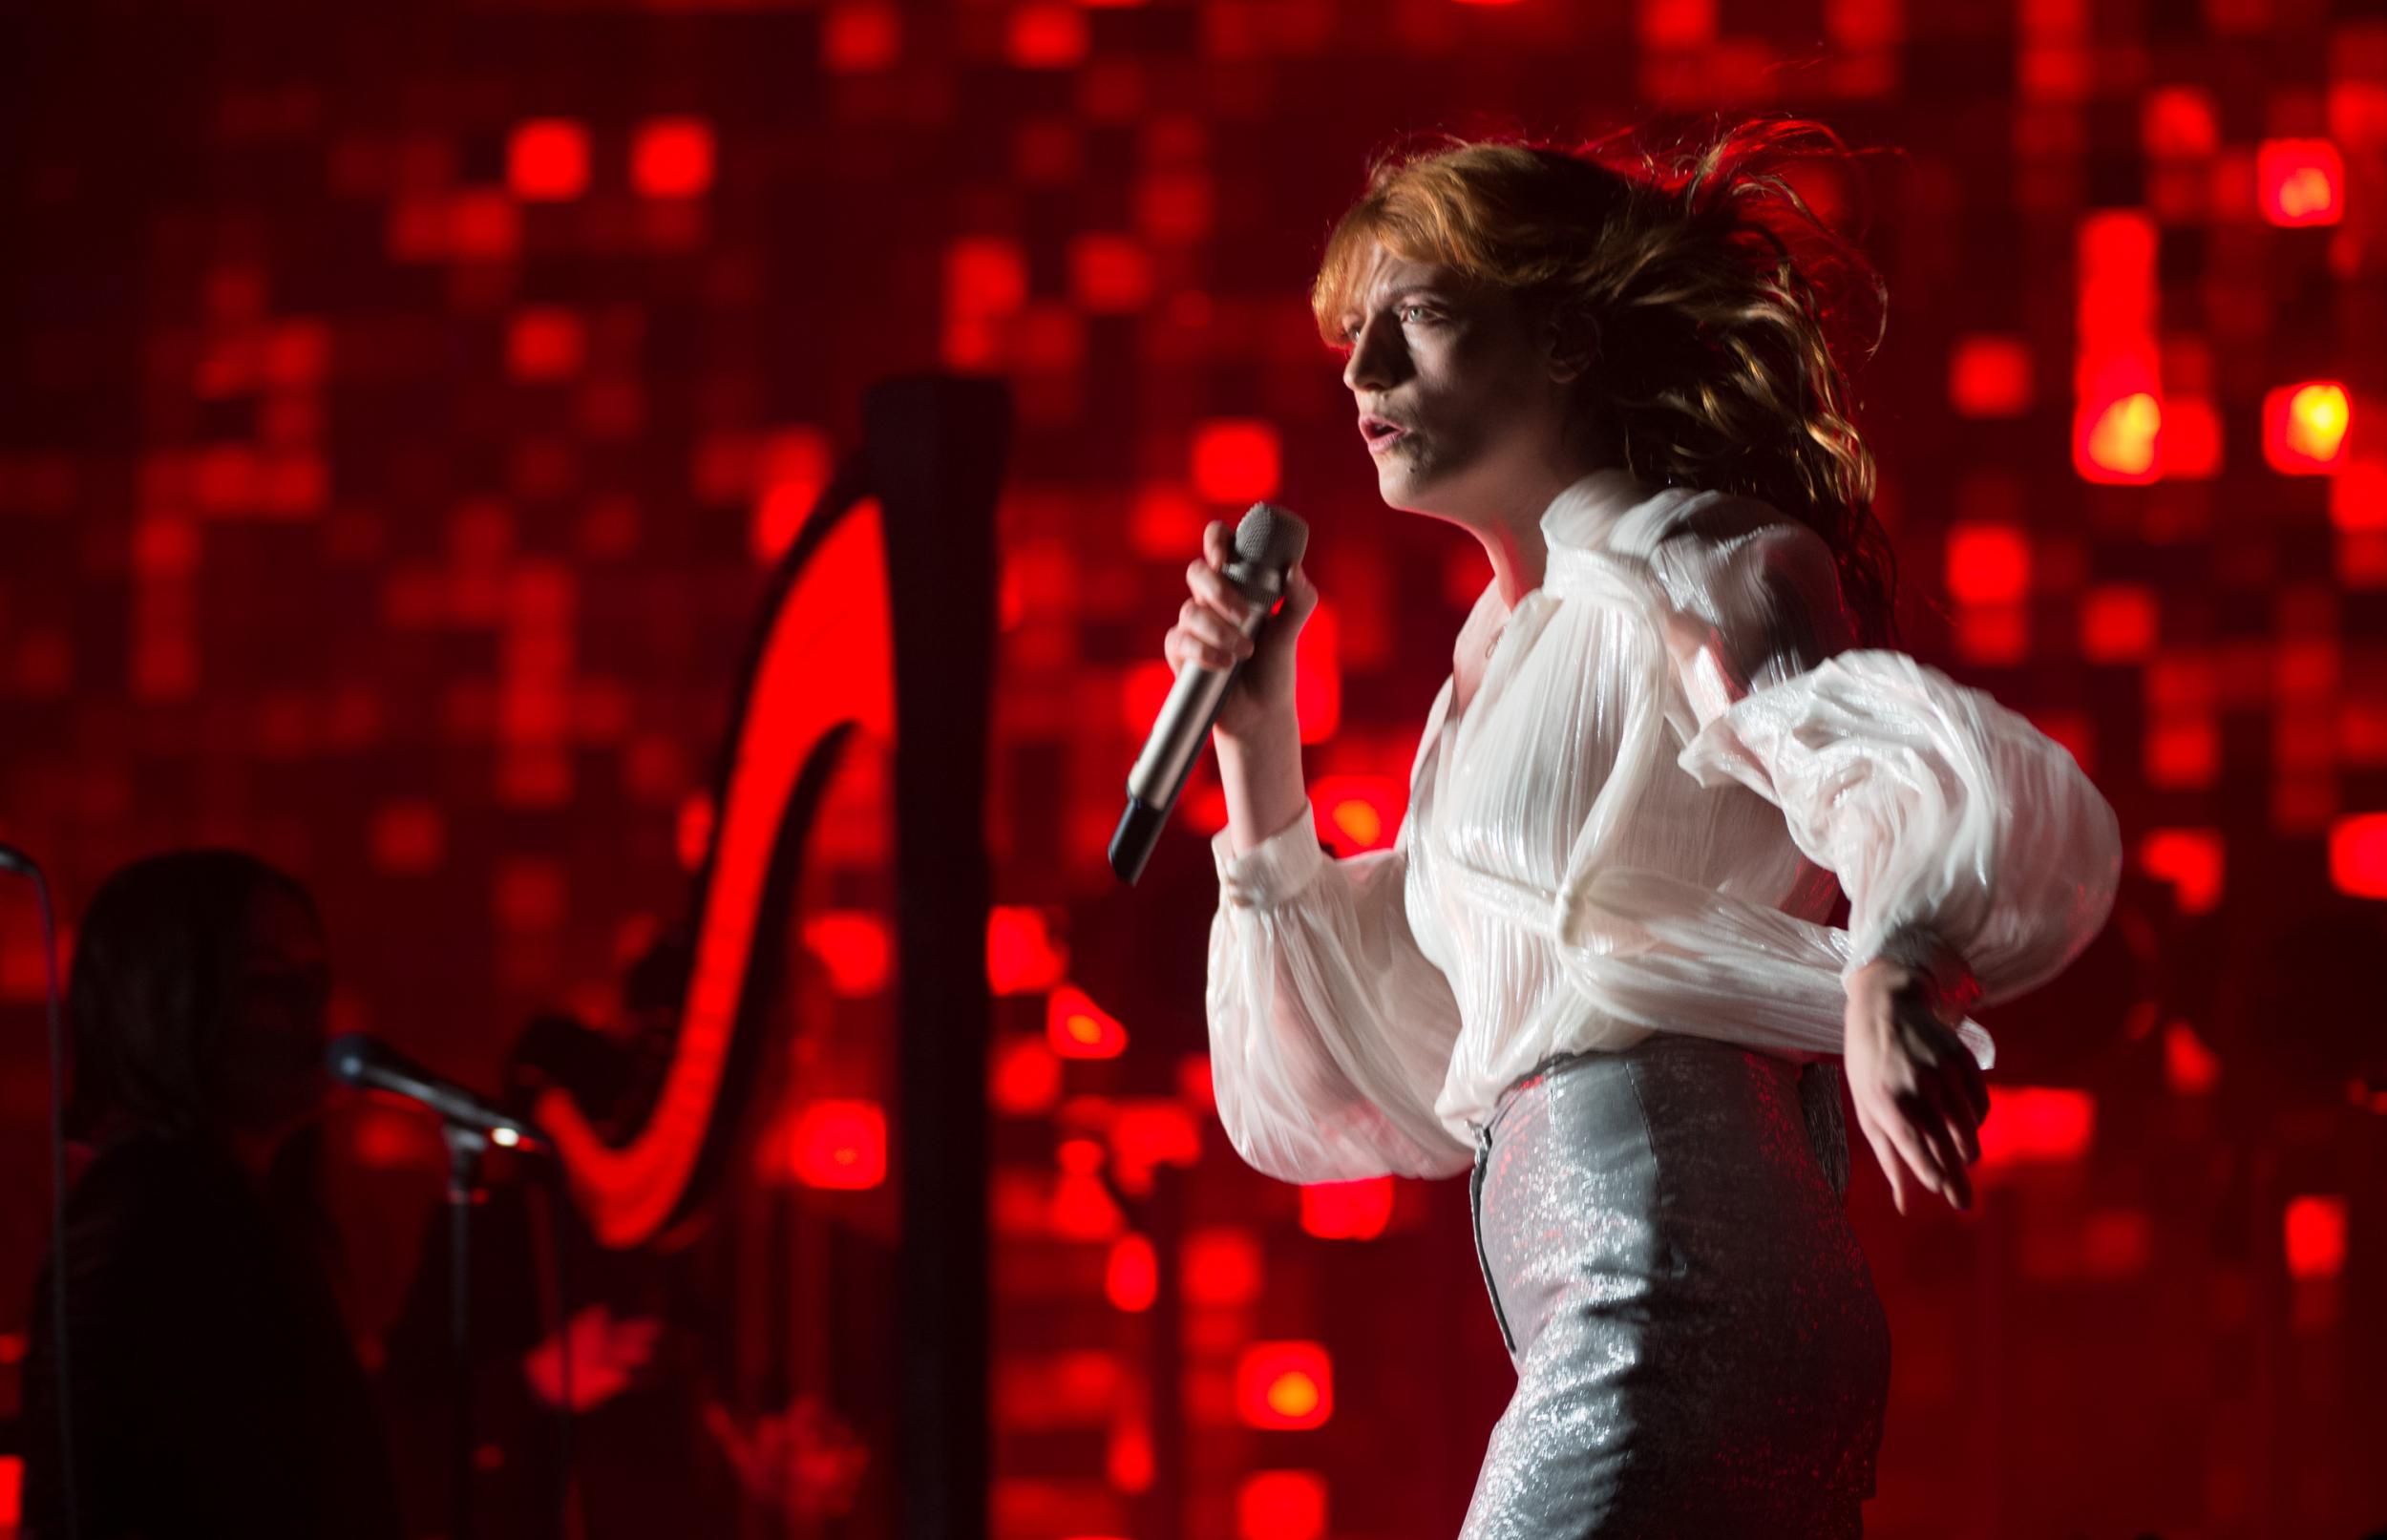 Florence Welch of Florence and the Machine performs on The Pyramid Stage during the Glastonbury Festival at Worthy Farm, Pilton on June 26, 2015